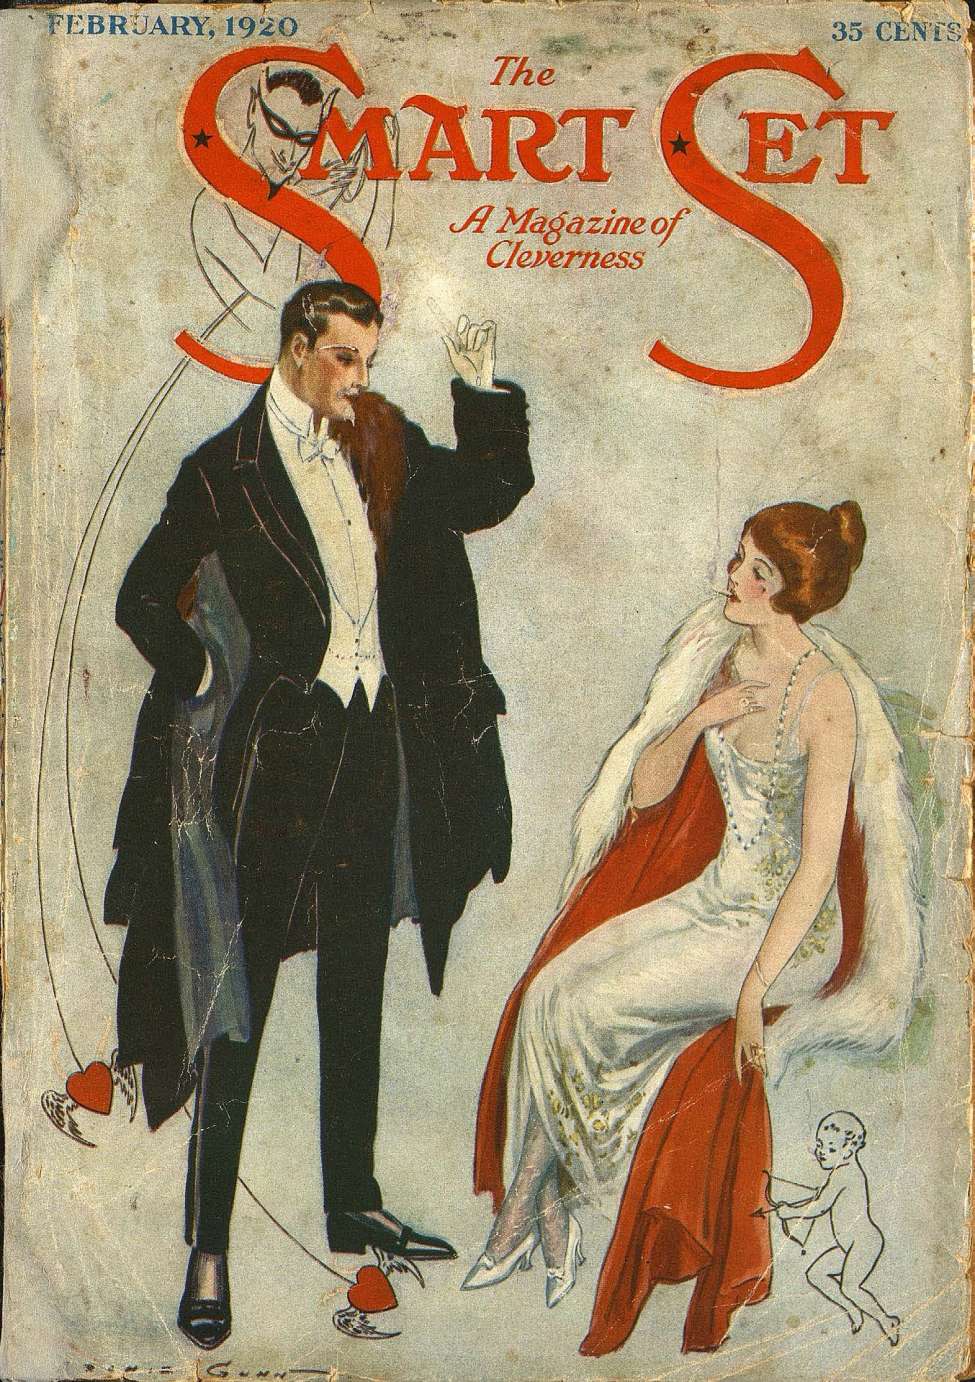 An illustration depicting a man in a suit standing in front of a seated woman in a dress